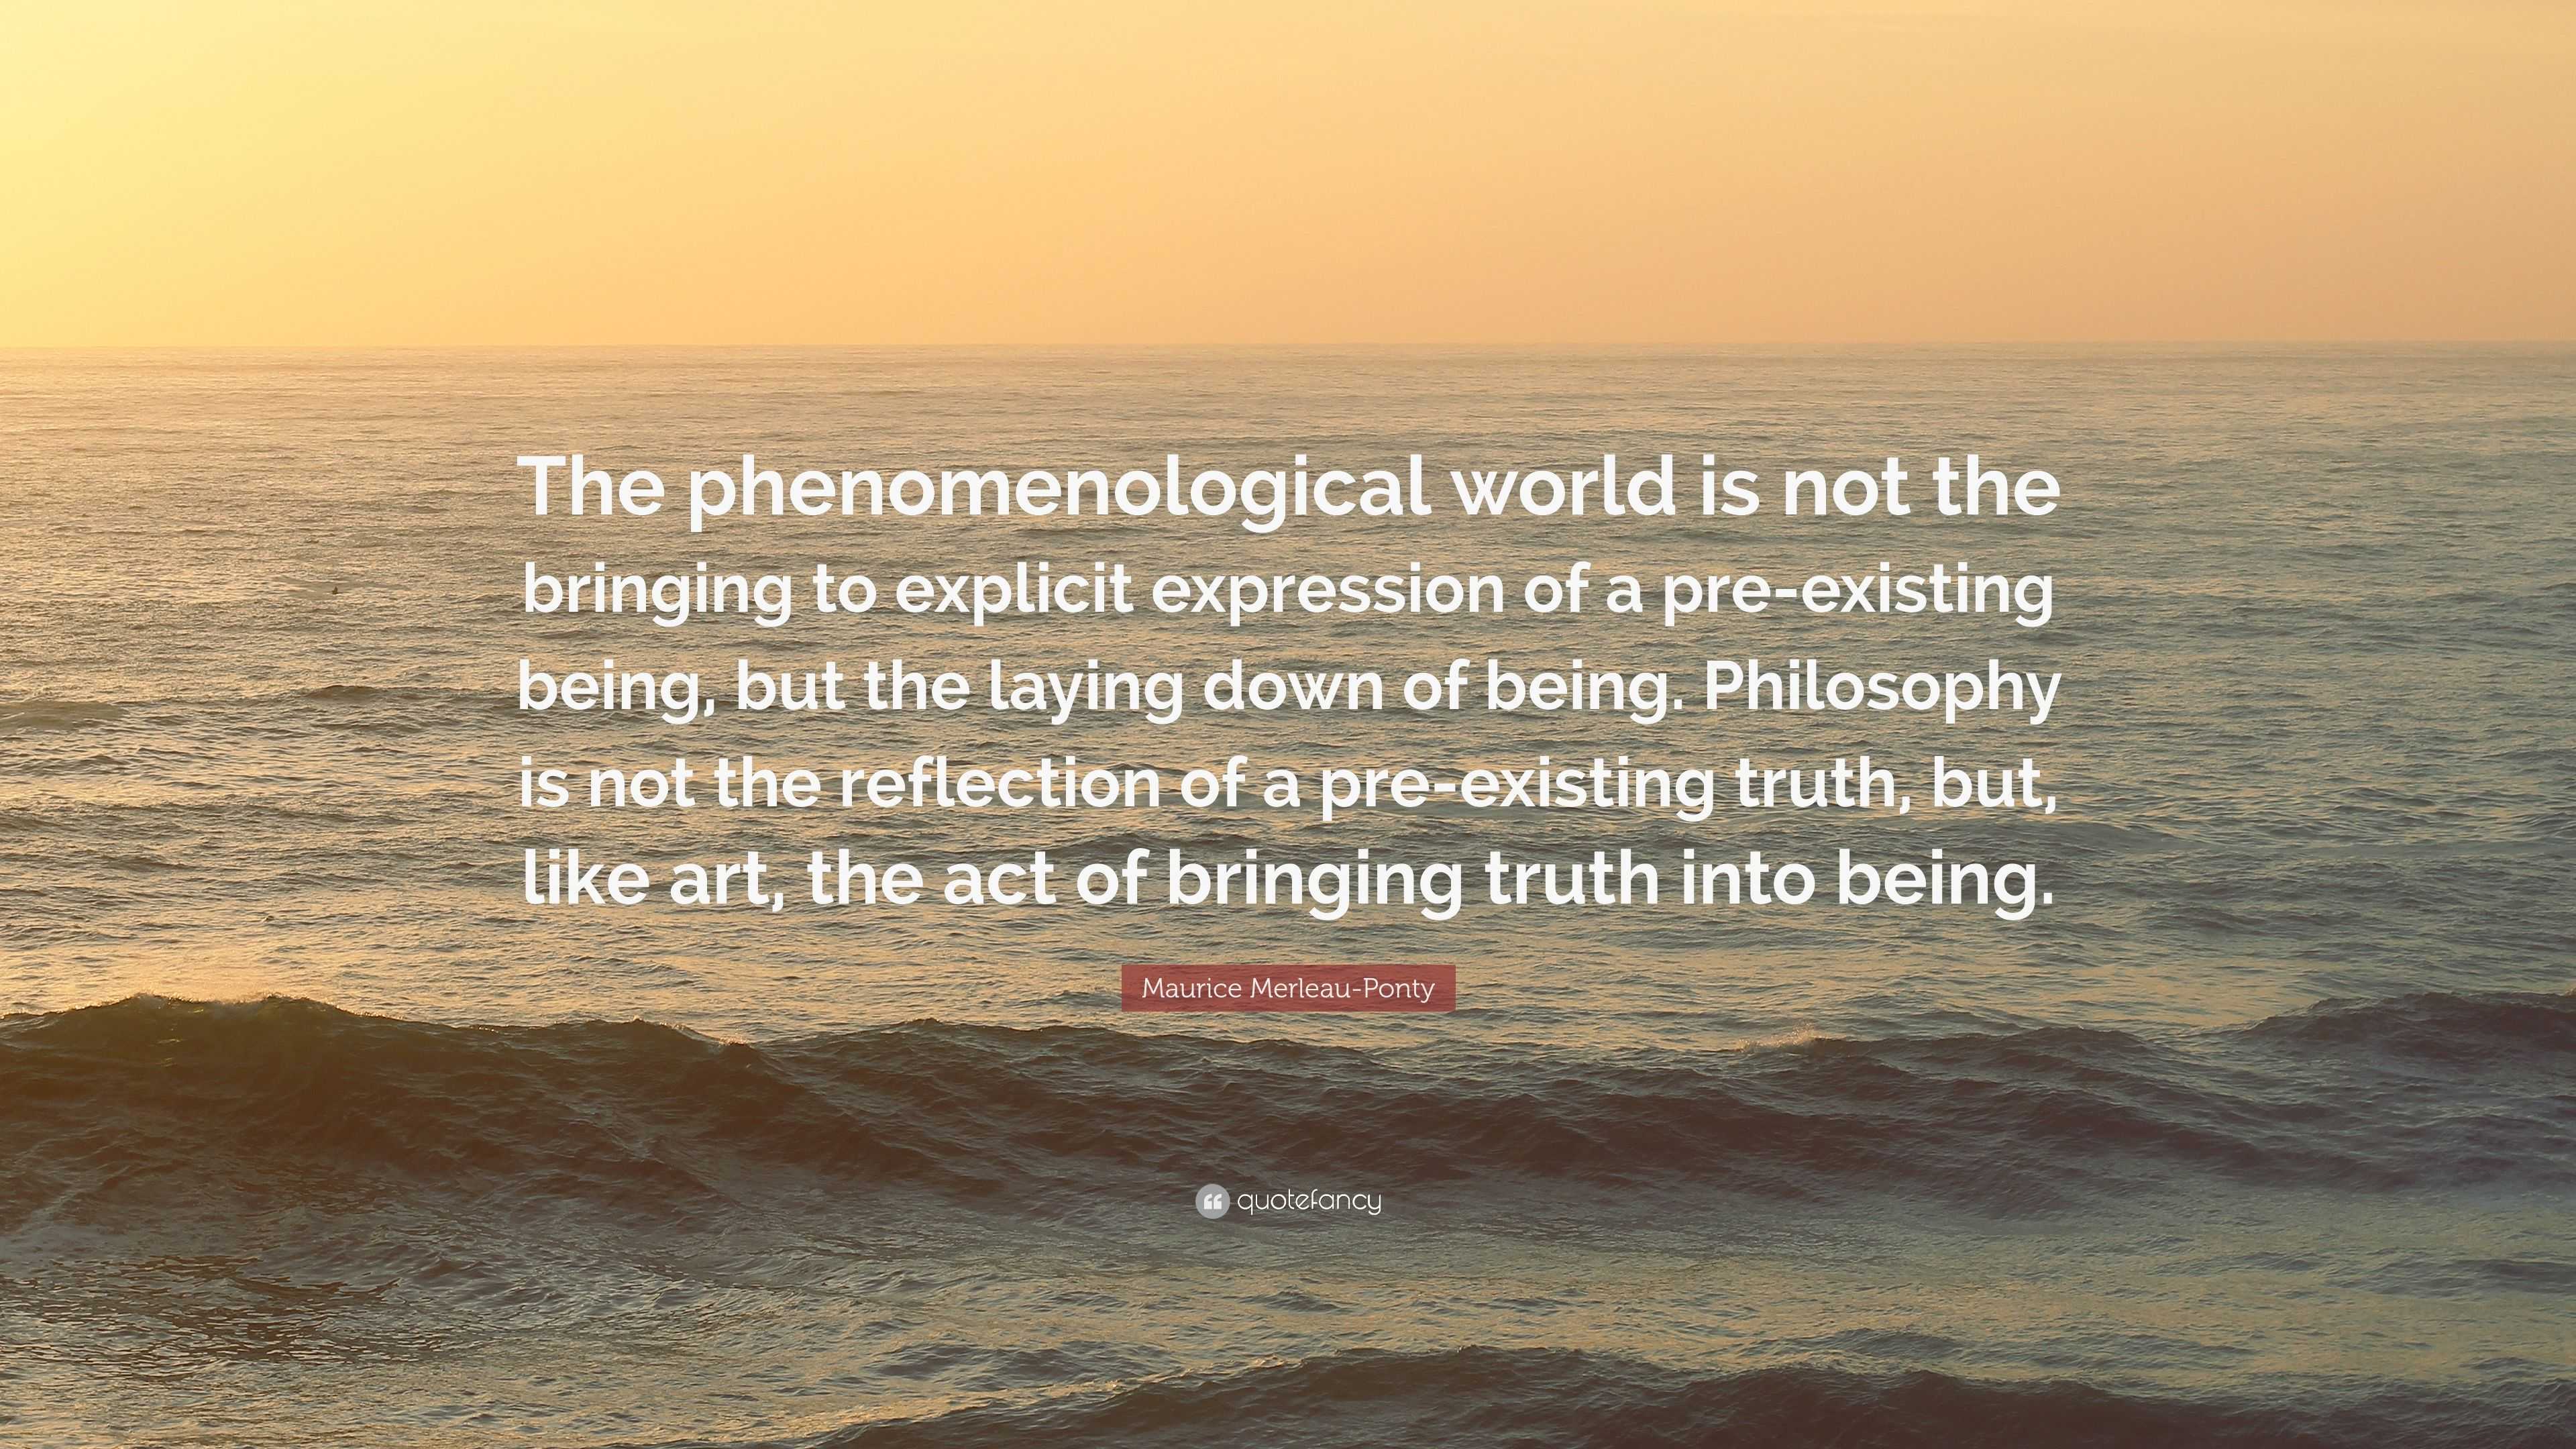 2469989-Maurice-Merleau-Ponty-Quote-The-phenomenological-world-is-not-the.jpg